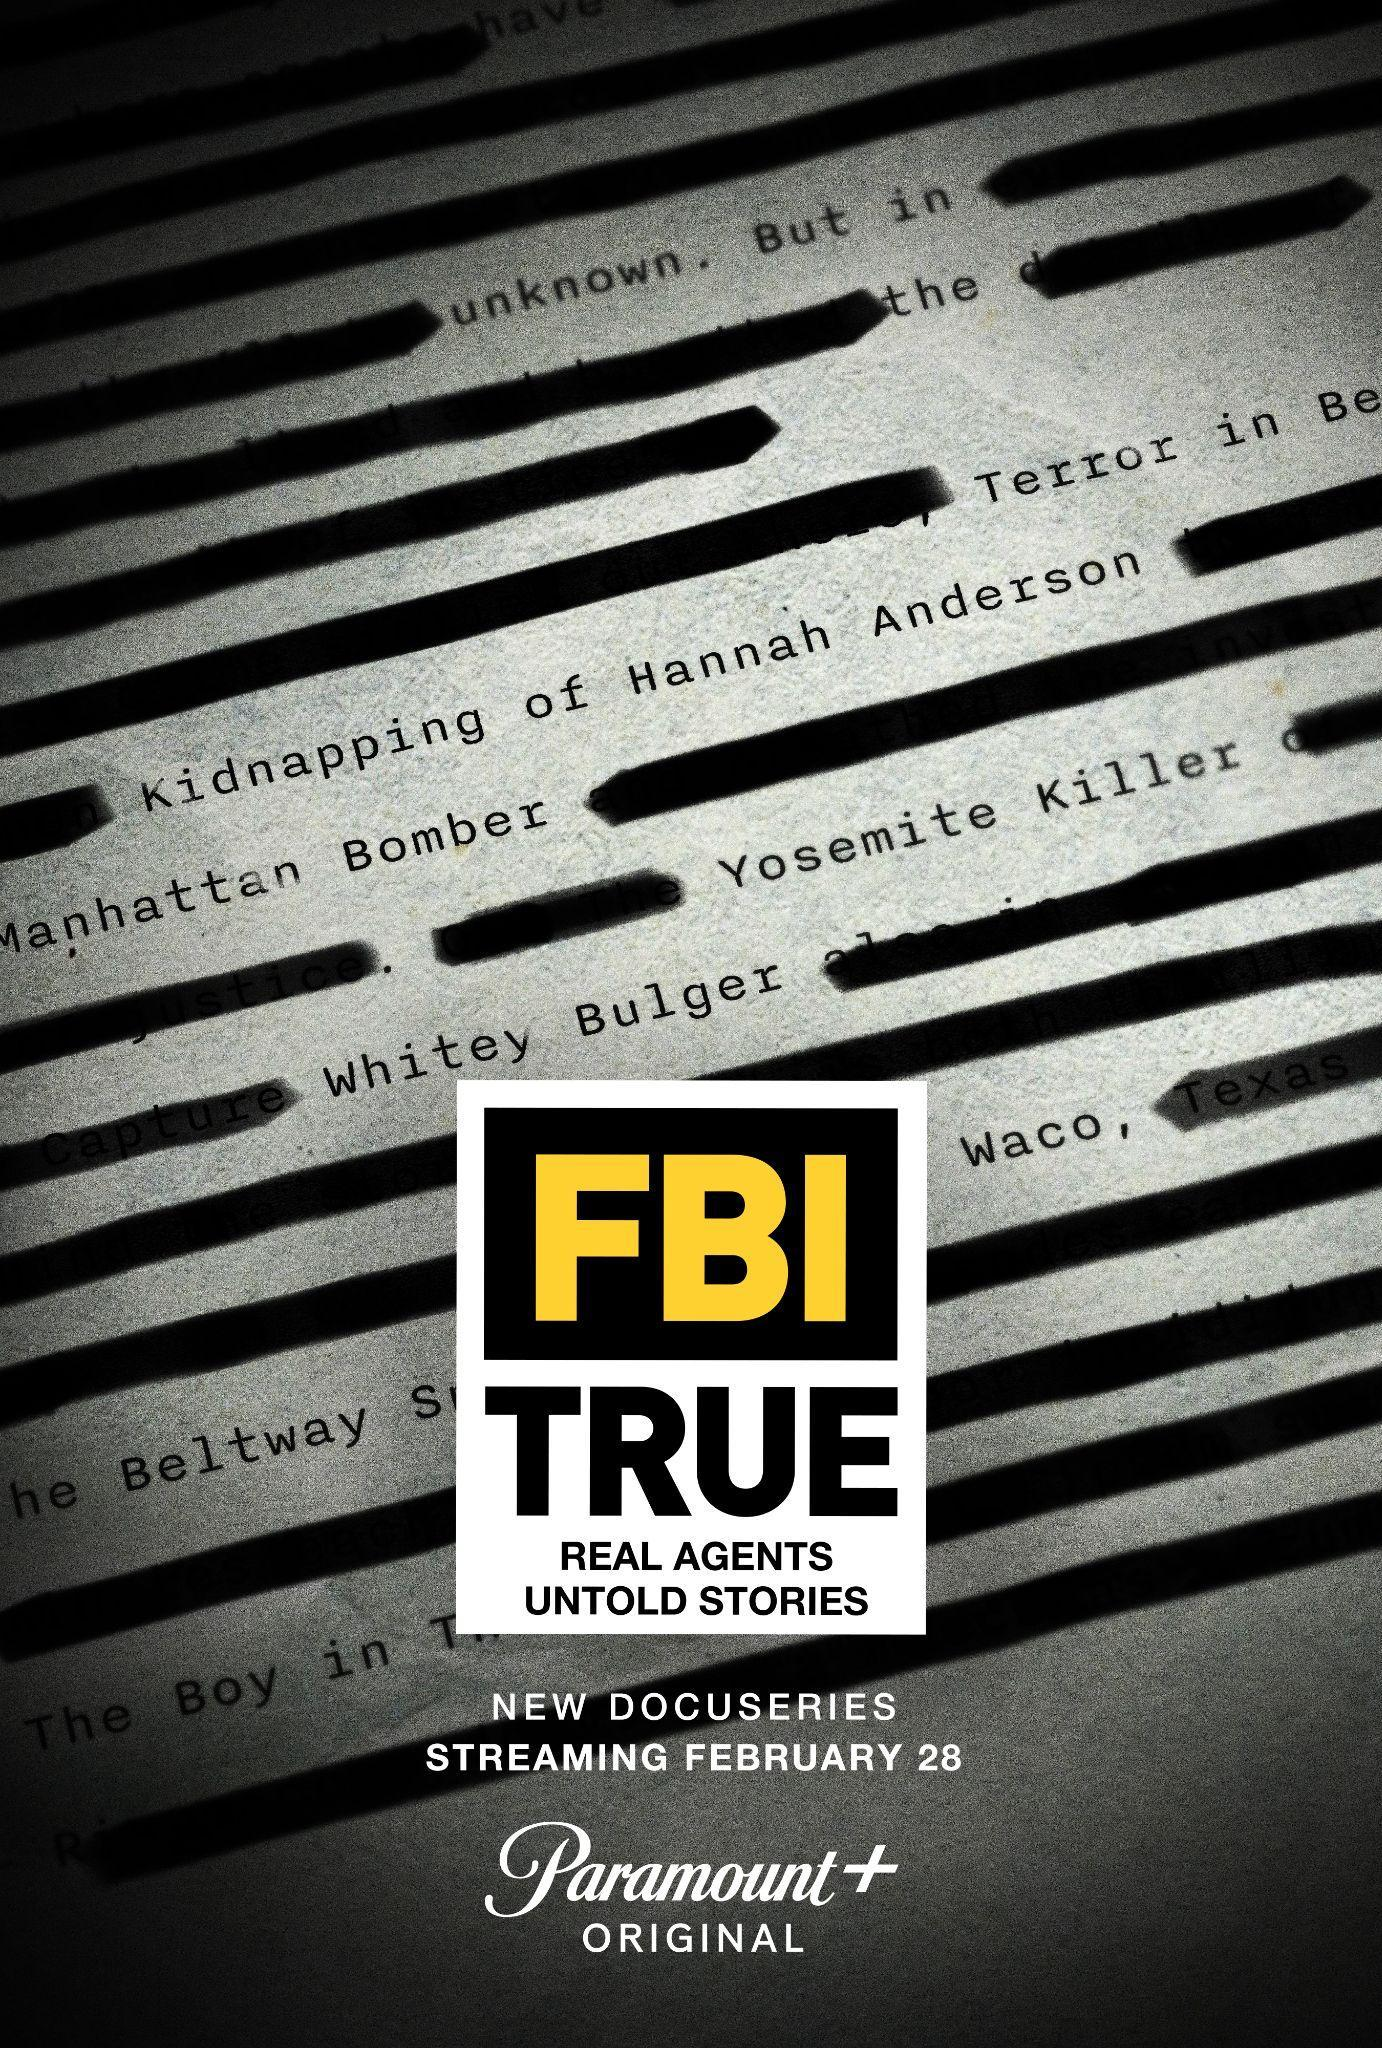 NickALive! How to Stream FBI True for FREE on Paramount+